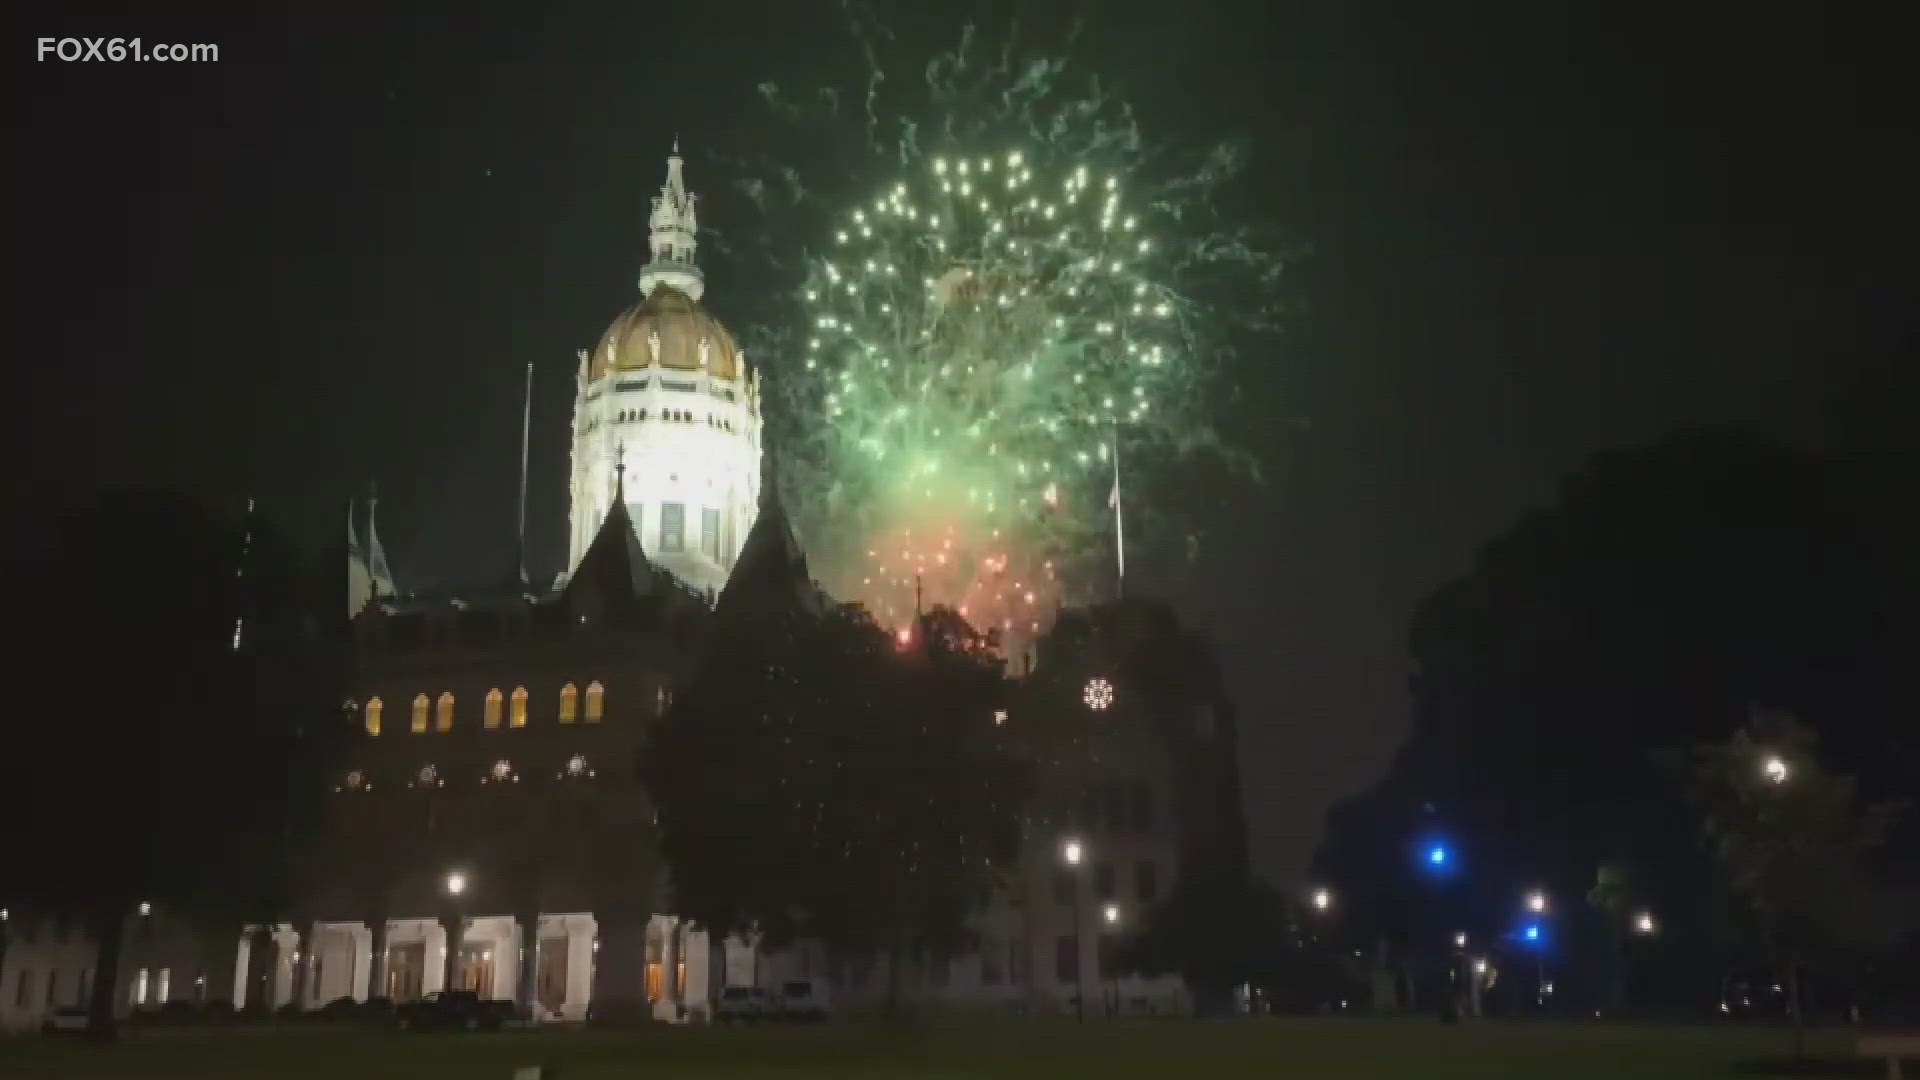 Hartford Bonanza will feature music, food, fun, and fireworks! Event Director Jeff Devereux explains more.